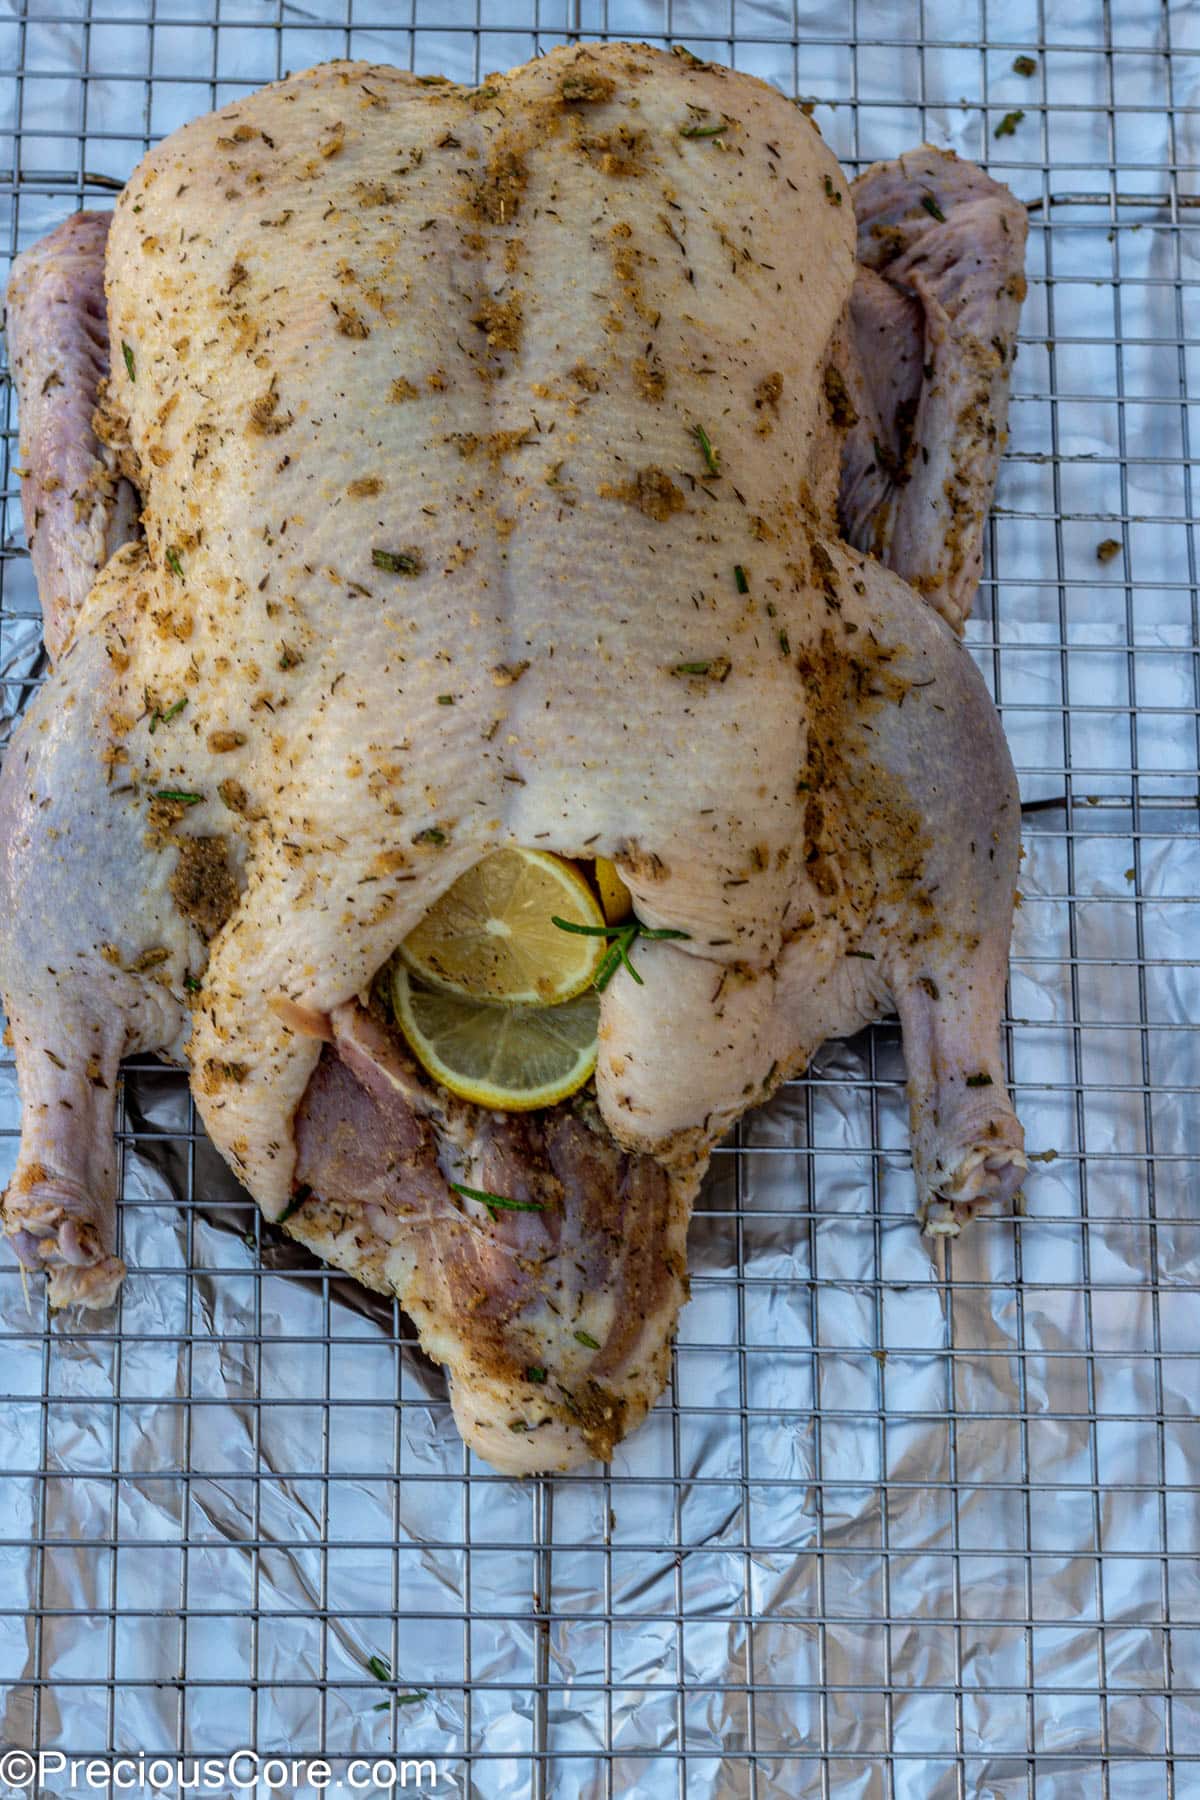 Whole duck seasoned with herbs and spices.